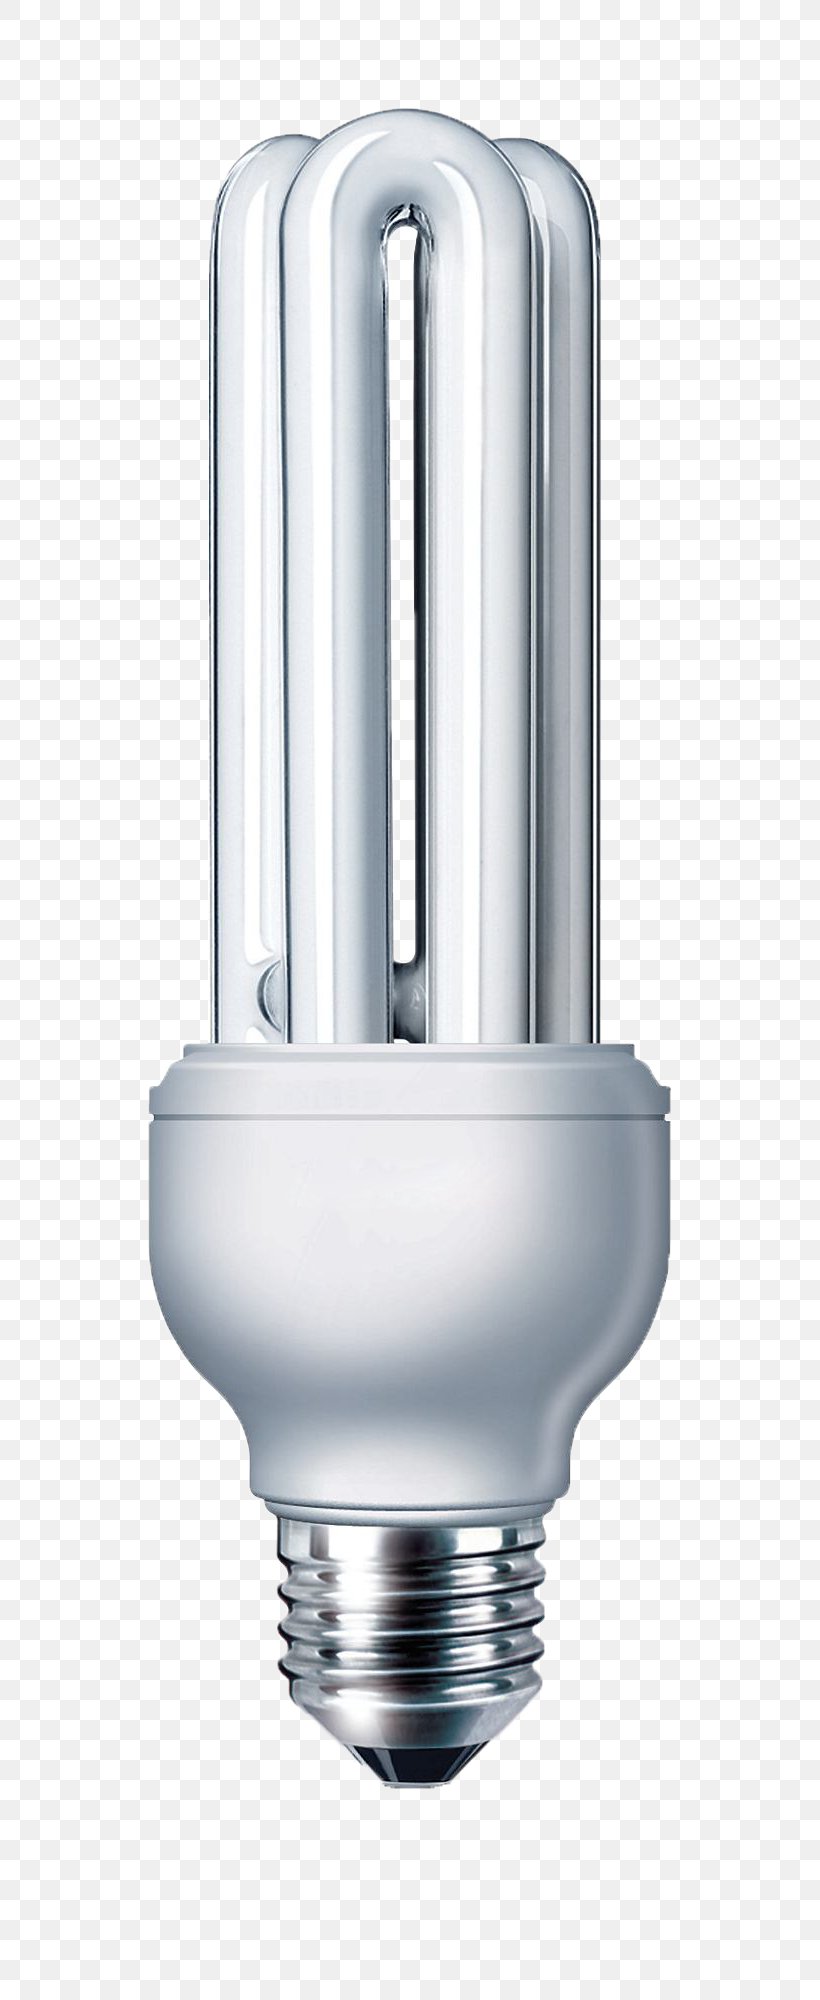 Incandescent Light Bulb Compact Fluorescent Lamp Philips Lighting, PNG, 717x2000px, Light, Compact Fluorescent Lamp, Edison Screw, Efficient Energy Use, Electric Light Download Free